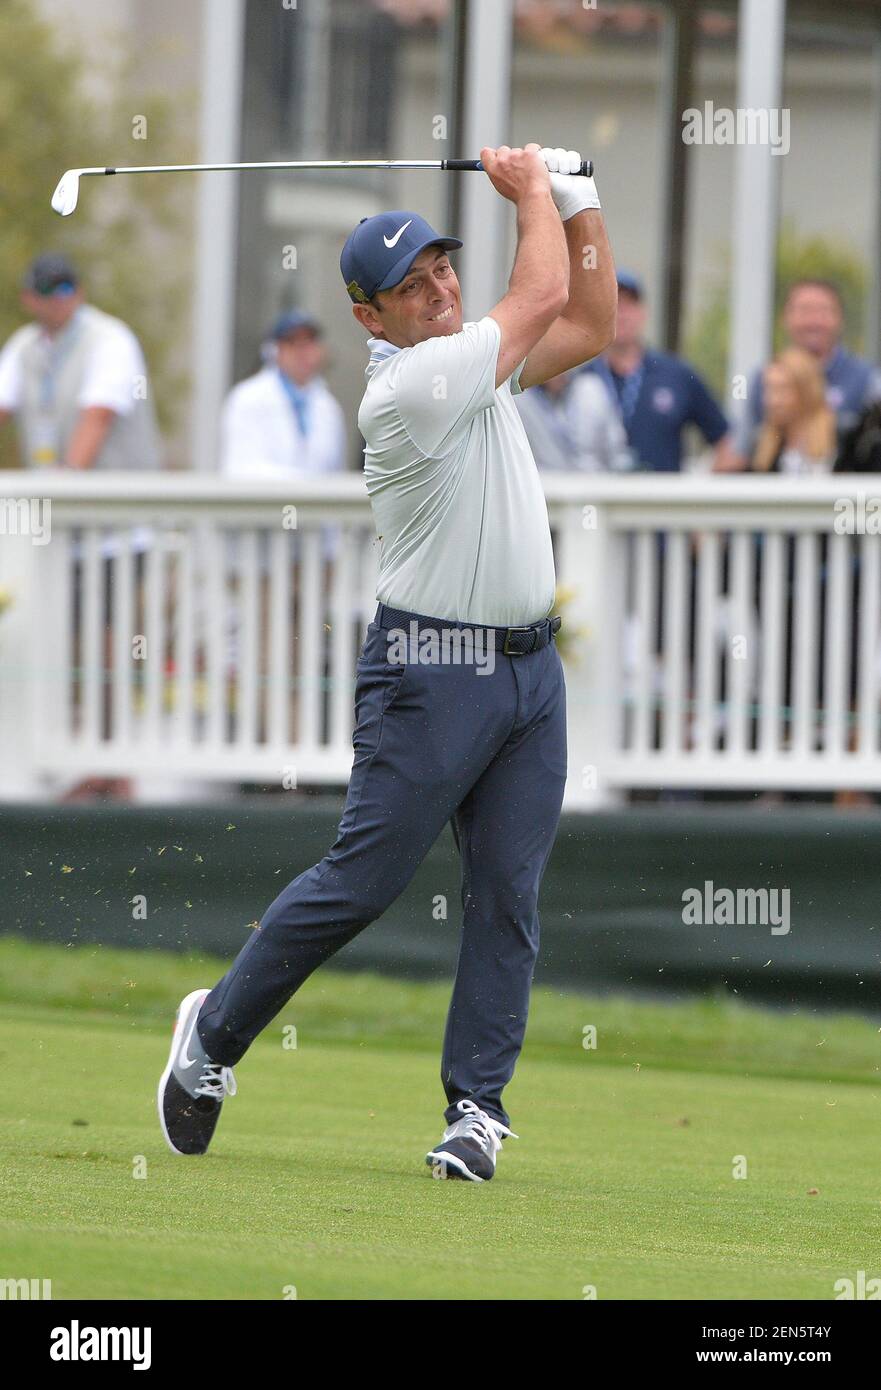 Jun 13, 2019; Pebble Beach, CA, USA; Francesco Molinari plays his second  shot on the 16th hole during the first round of the 2019 U.S. Open golf  tournament at Pebble Beach Golf